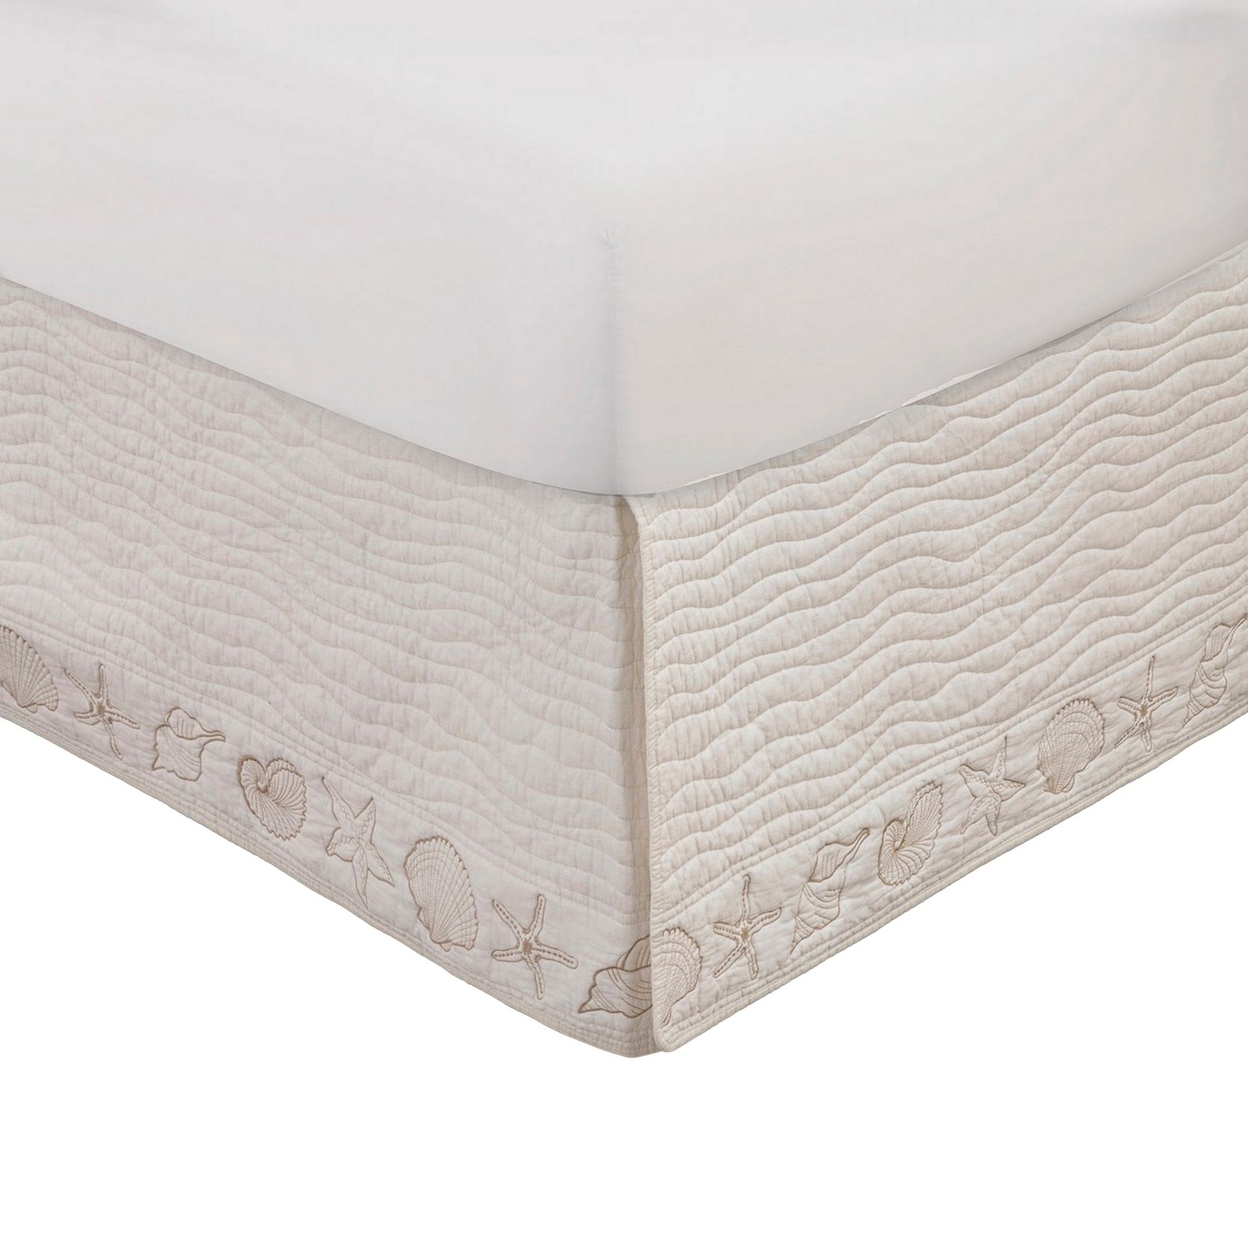 Sima Seashell Quilted Twin Bed Skirt, Cotton Fill, Triple Layered, Ivory-Saltoro Sherpi